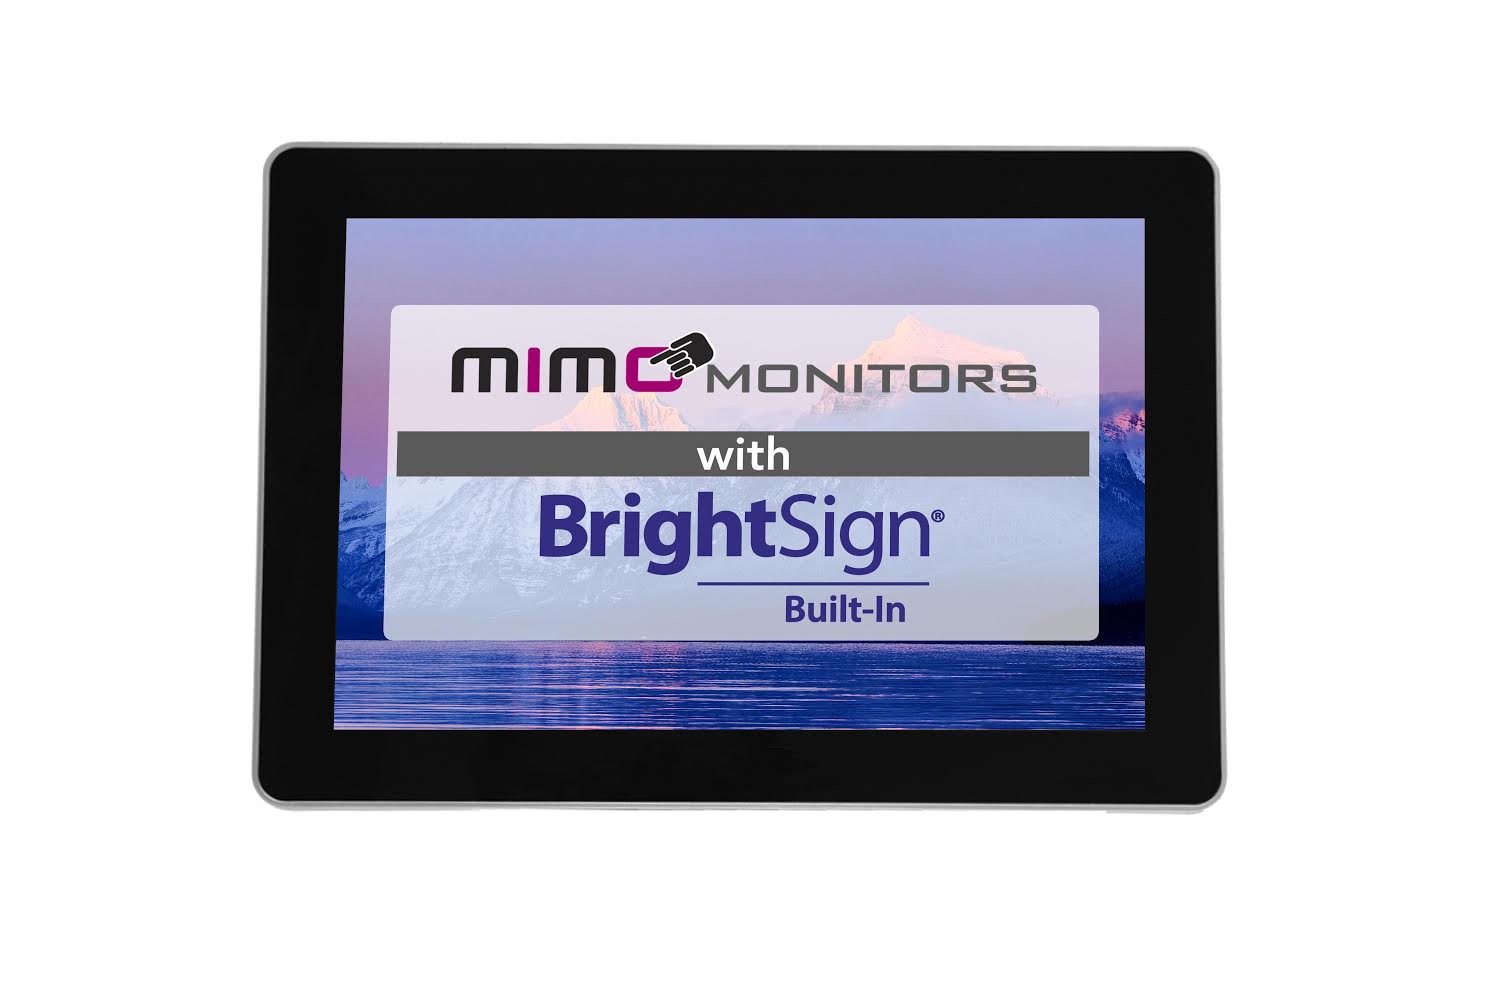 August 2018 Update: Mimo Monitors and BrightSign Partner for Revolutionary Entry in the Digital Signage Market